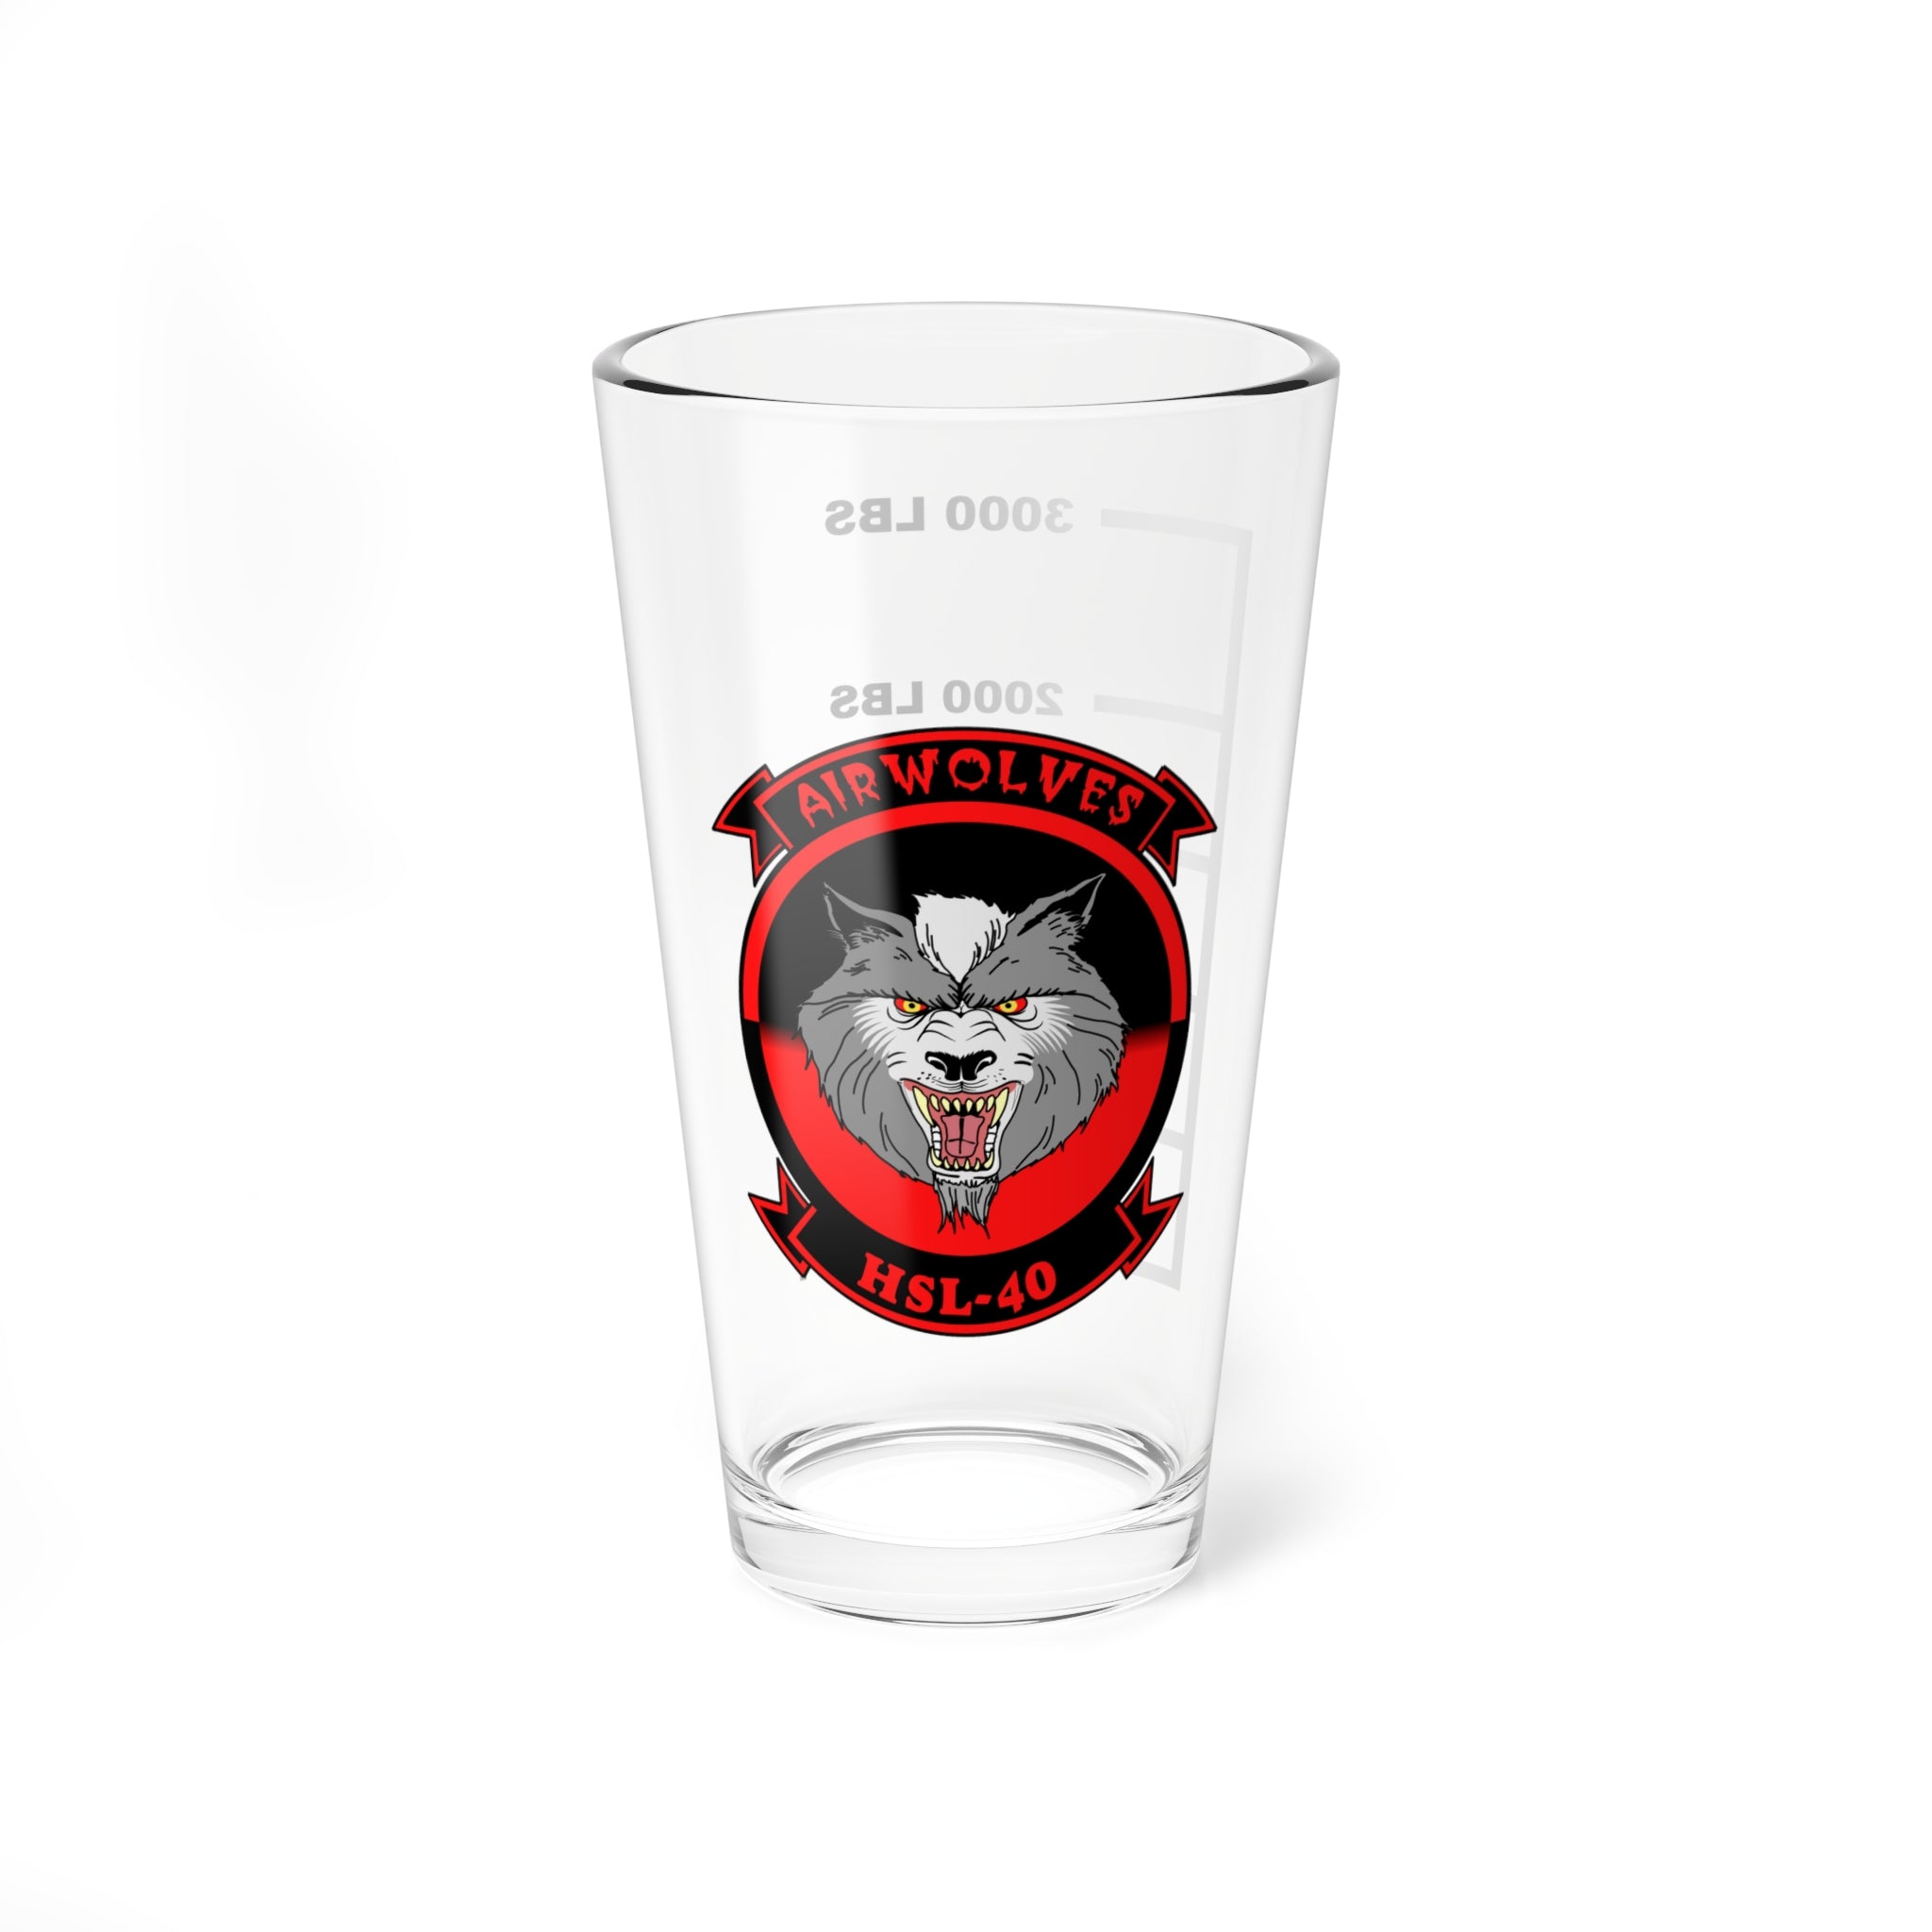 HSL-40 "Airwolves" Fuel Low Pint Glass Mixing Glass, 16oz, Navy, Aviation, Wings, Veteran, Helicopter, H-60, HSM, HSL